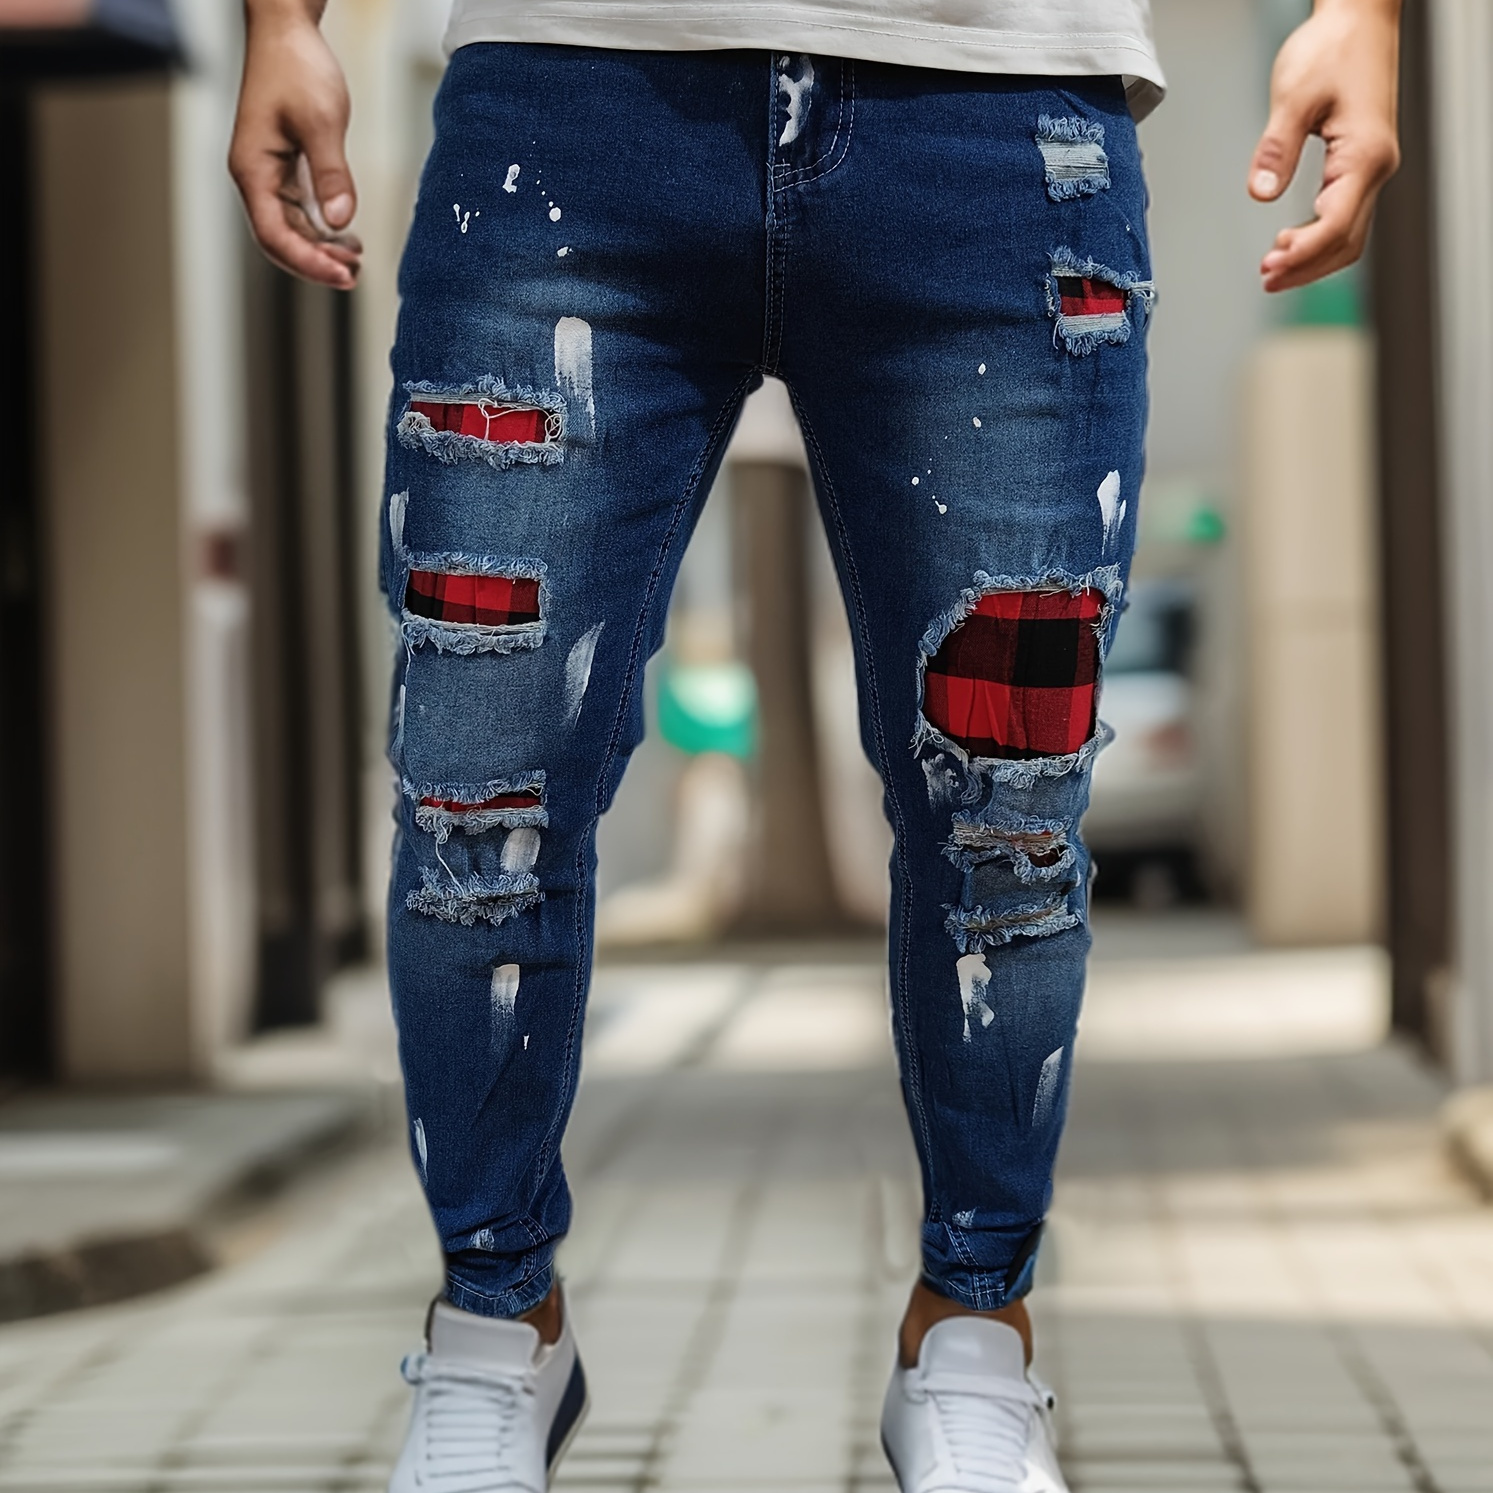 

Men's Cotton Blend Ripped Distressed Jeans, Chic Street Style Skinny Bottoms For Men, All Seasons